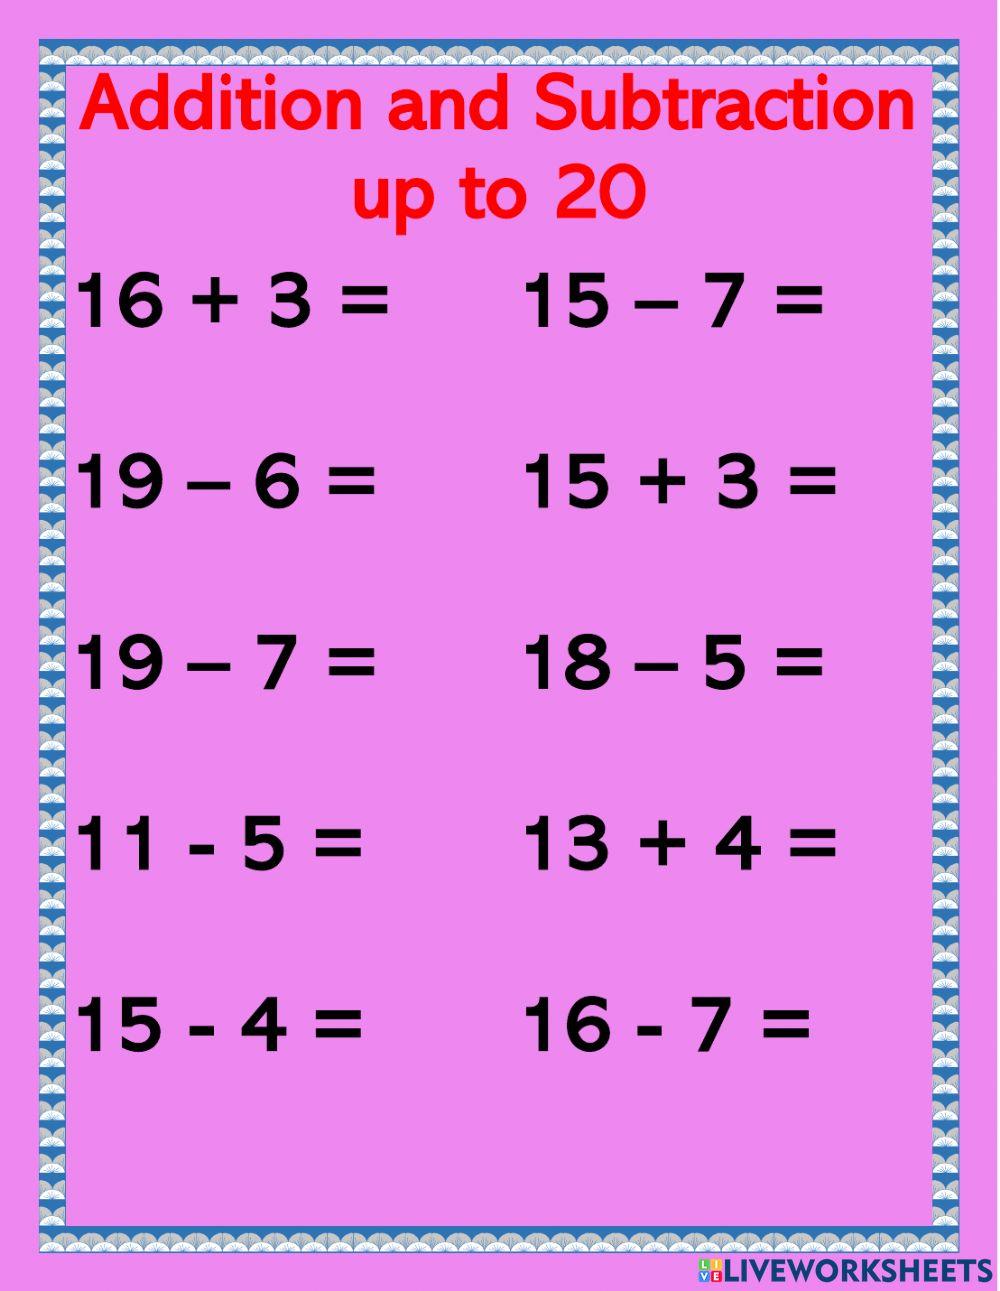 Addition and Subtraction to 20 Set 10